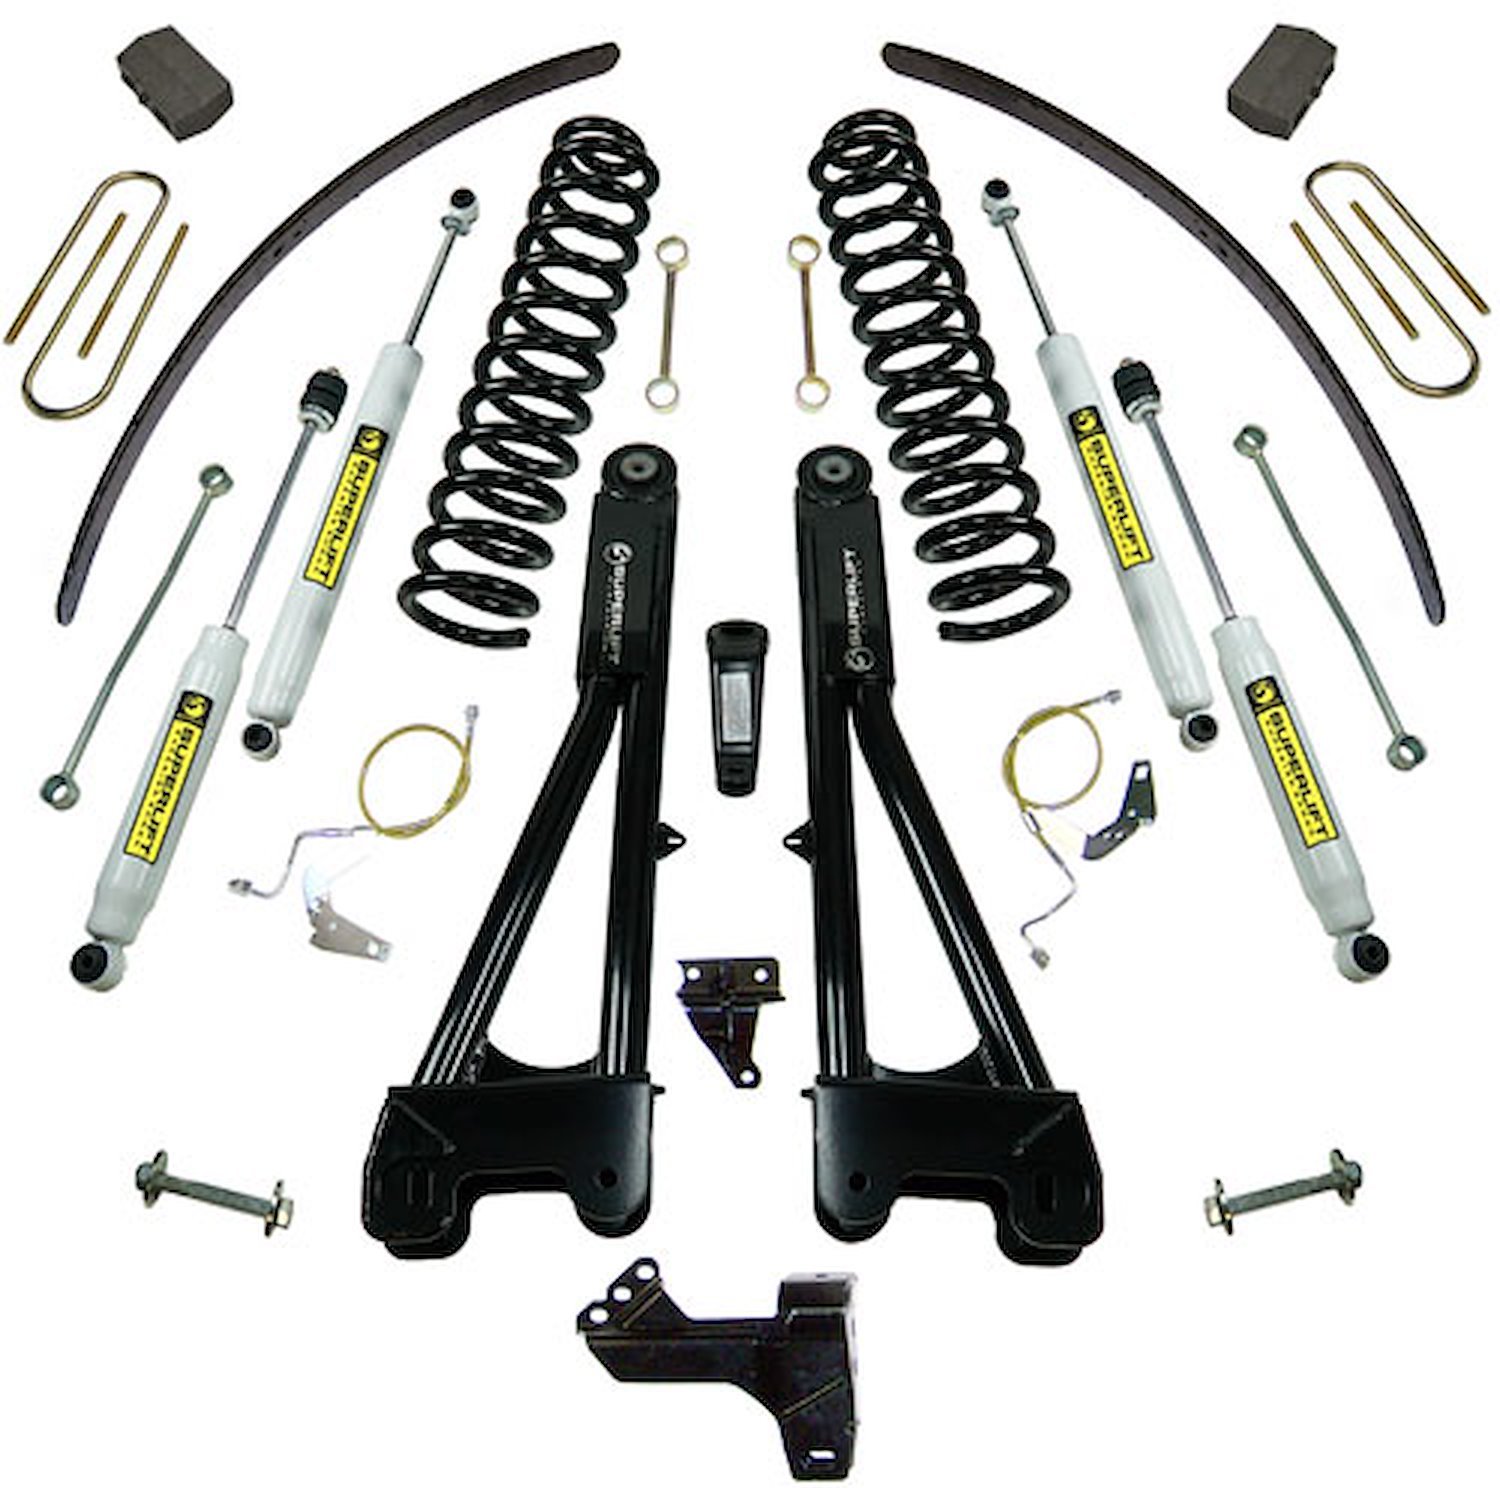 Suspension Lift Kit for Ford 2008-10 Ford F250 and F350 4WD models